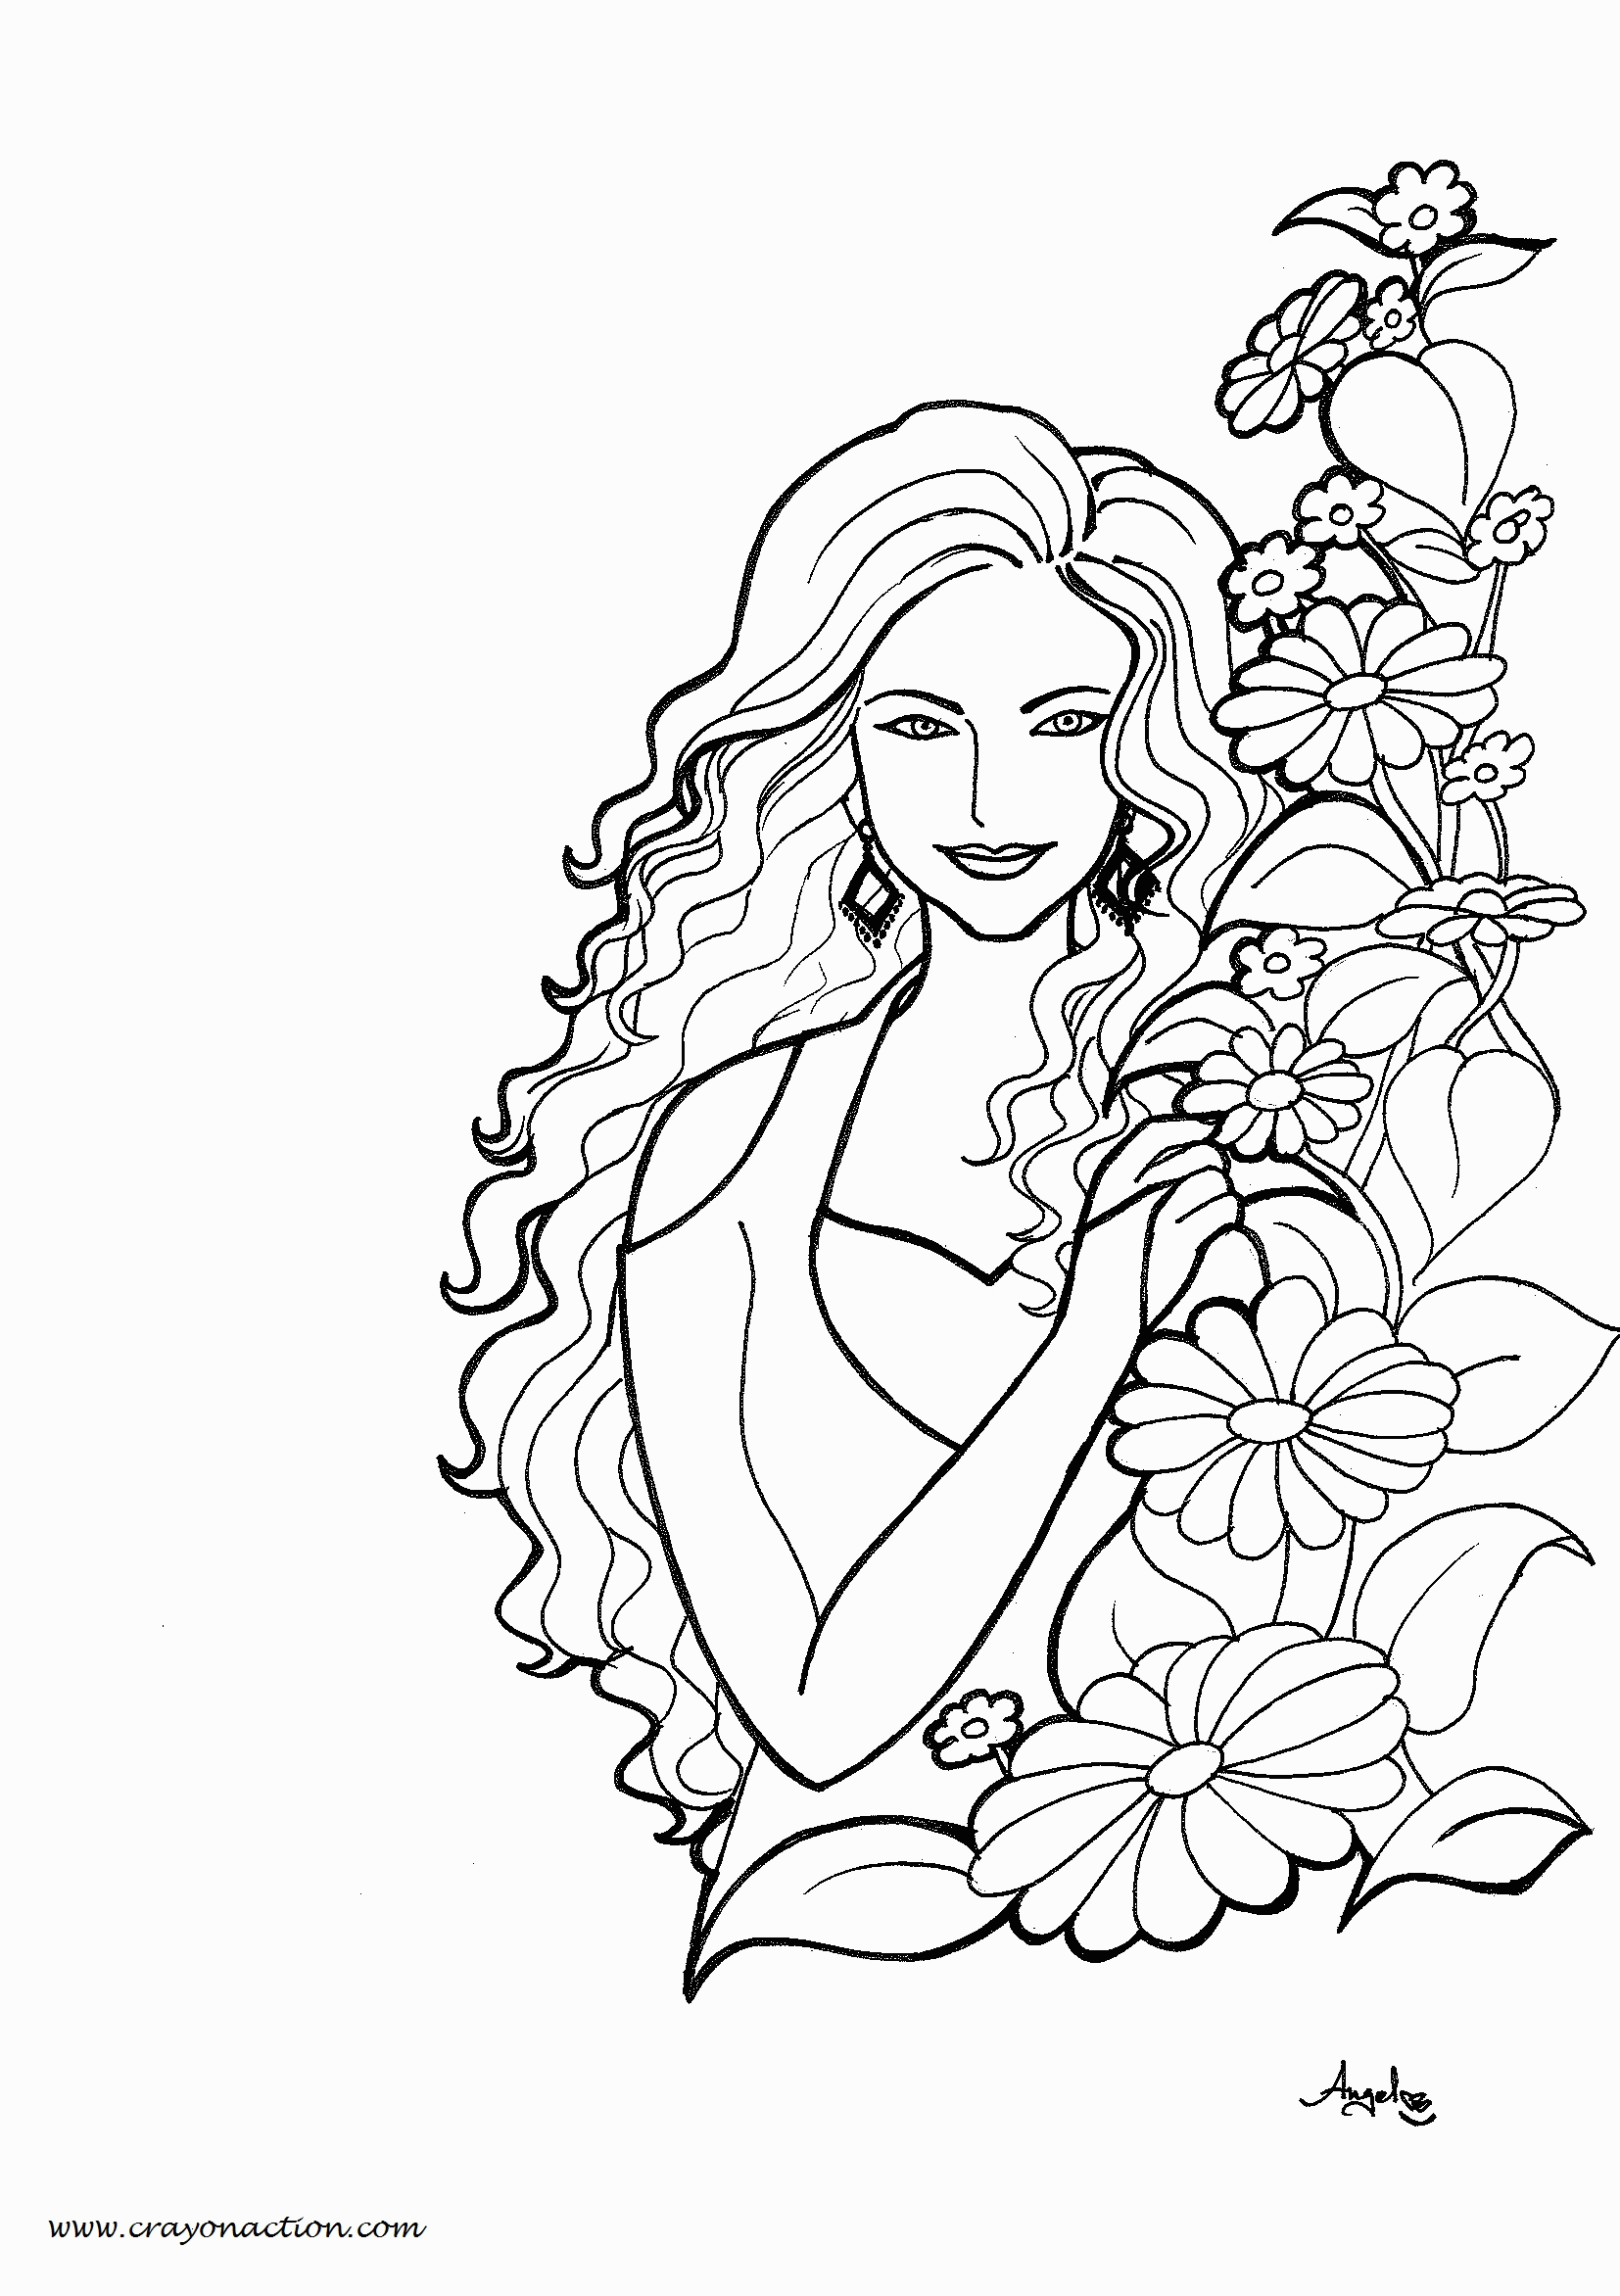 11 Pics Of Beautiful Women Coloring Pages - Beautiful Adult